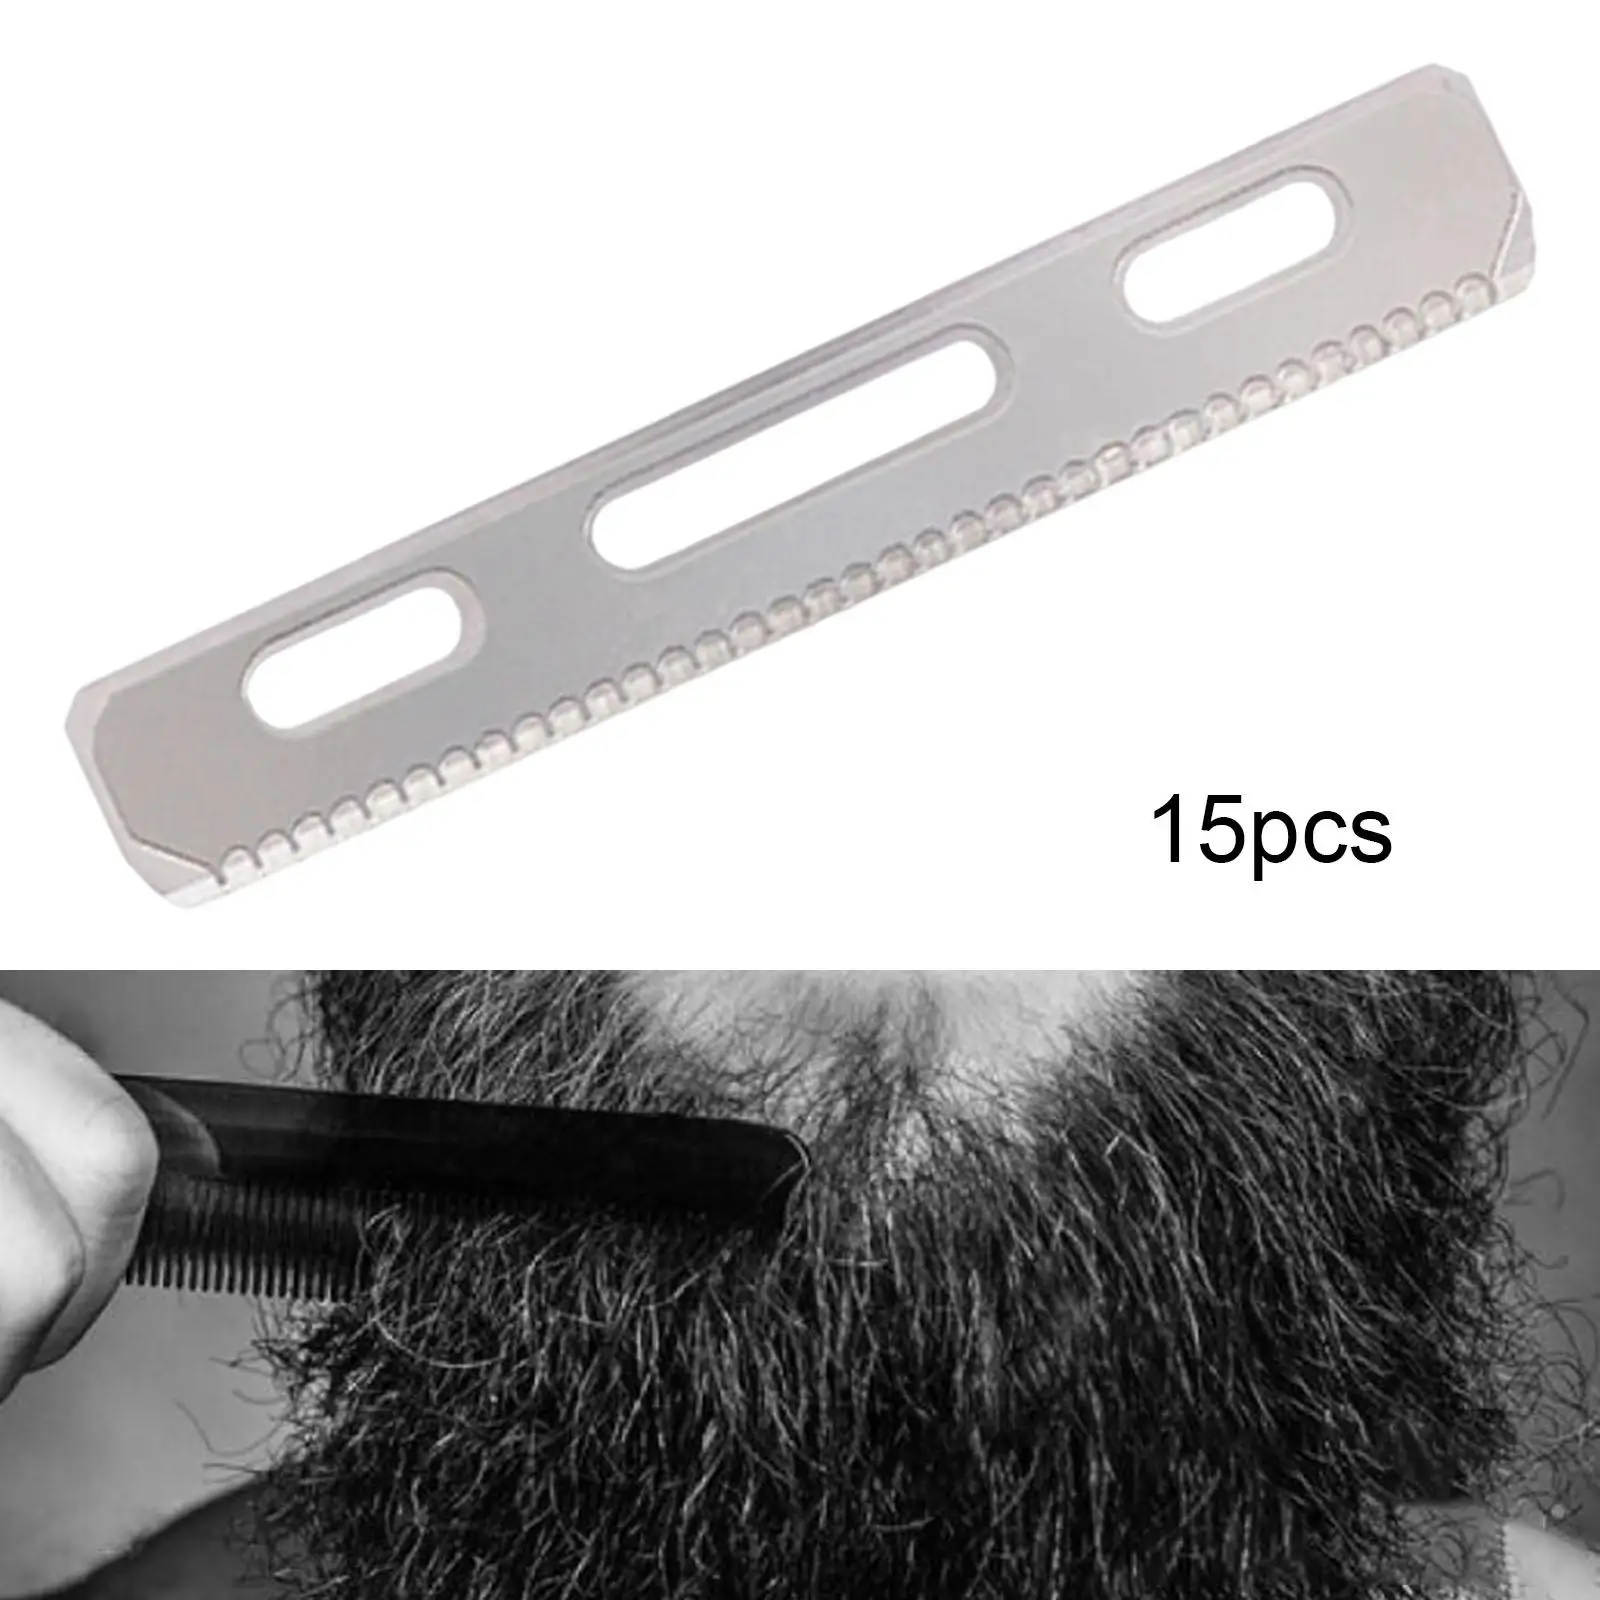 Eyebrow Trimmer Blades Stainless Steel Eyebrow Facial for Men